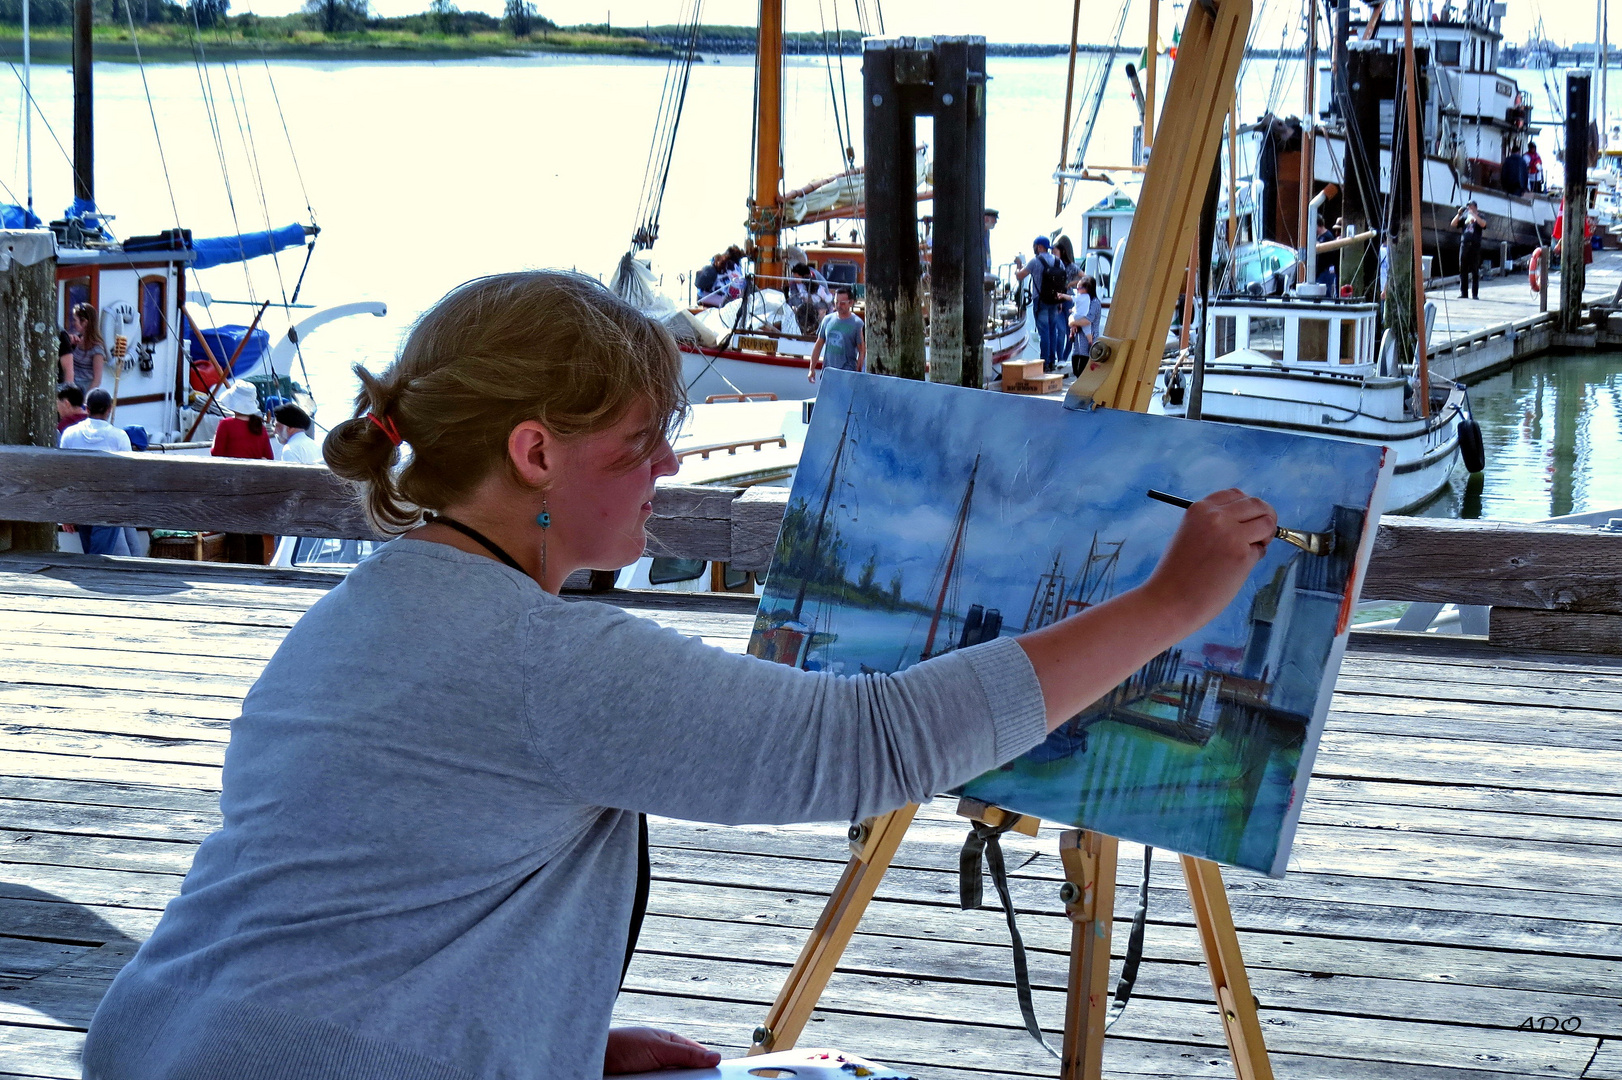 Painting the Harbour